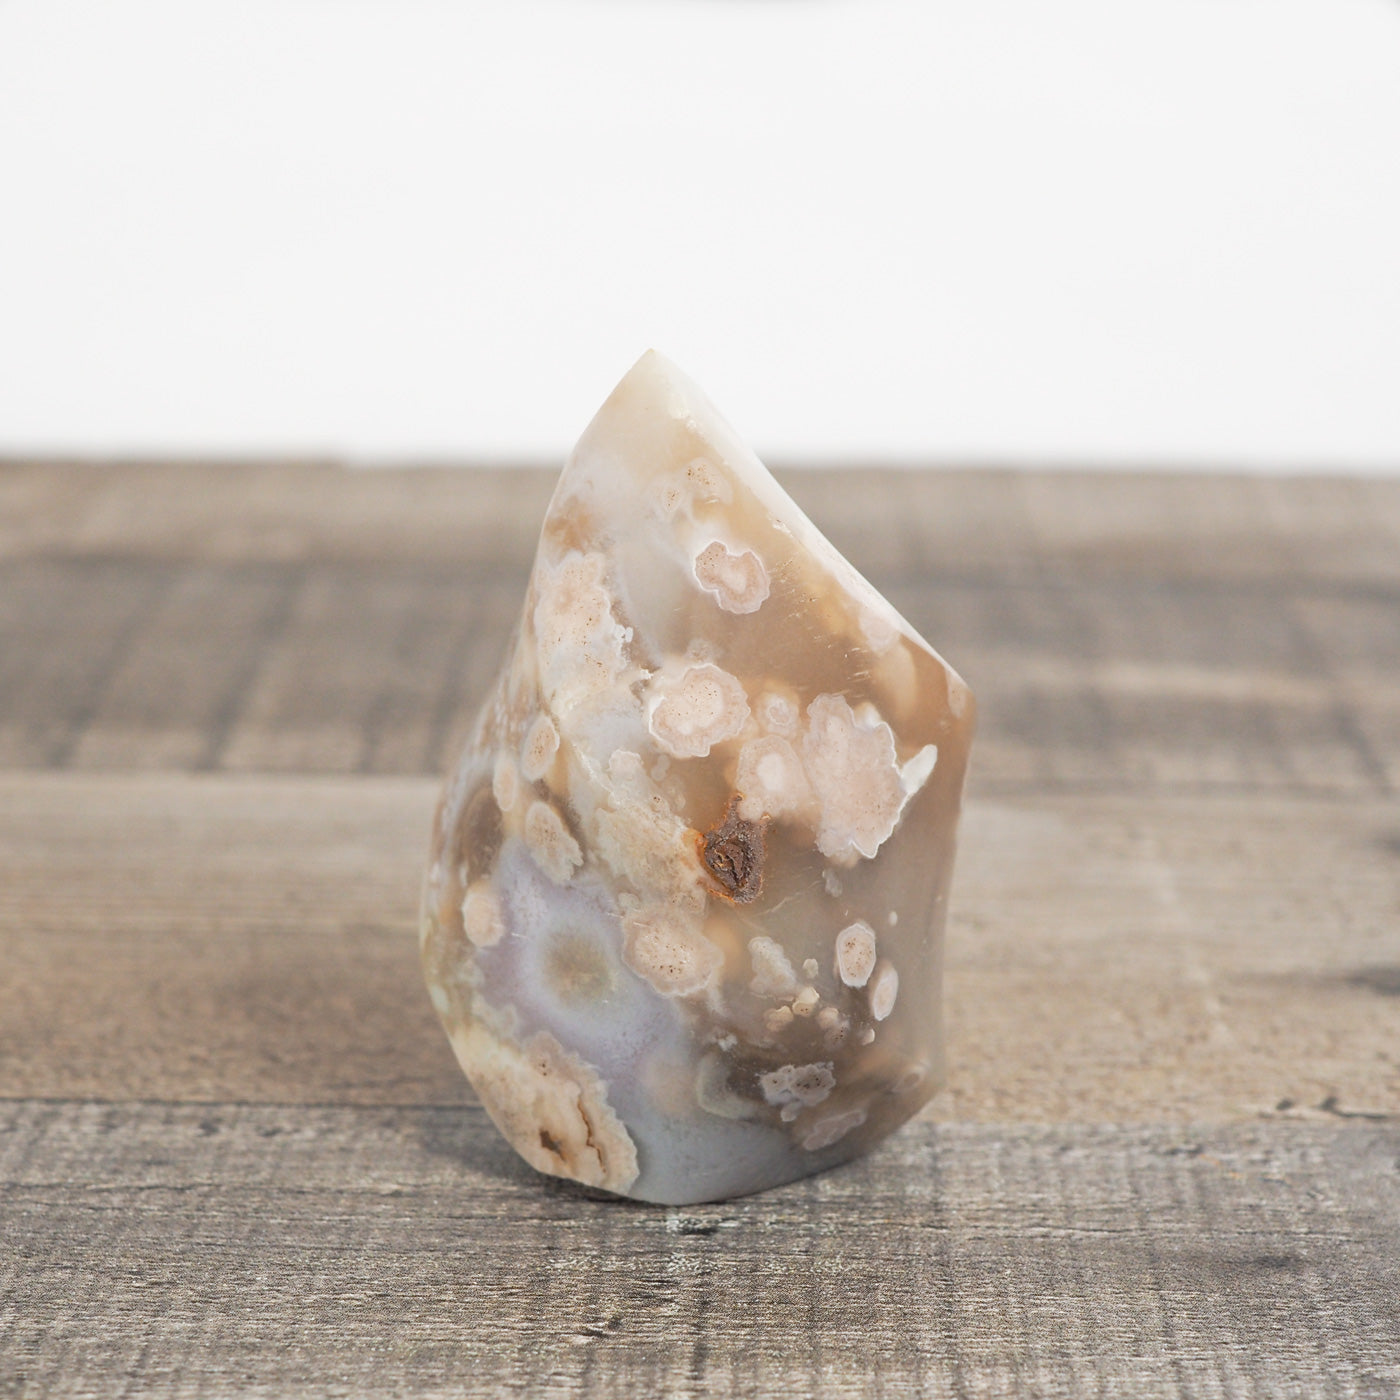 This sculpted flower agate flame with is about 2.5" tall and 1.5" wide at its base with beautiful blue agate inclusions.